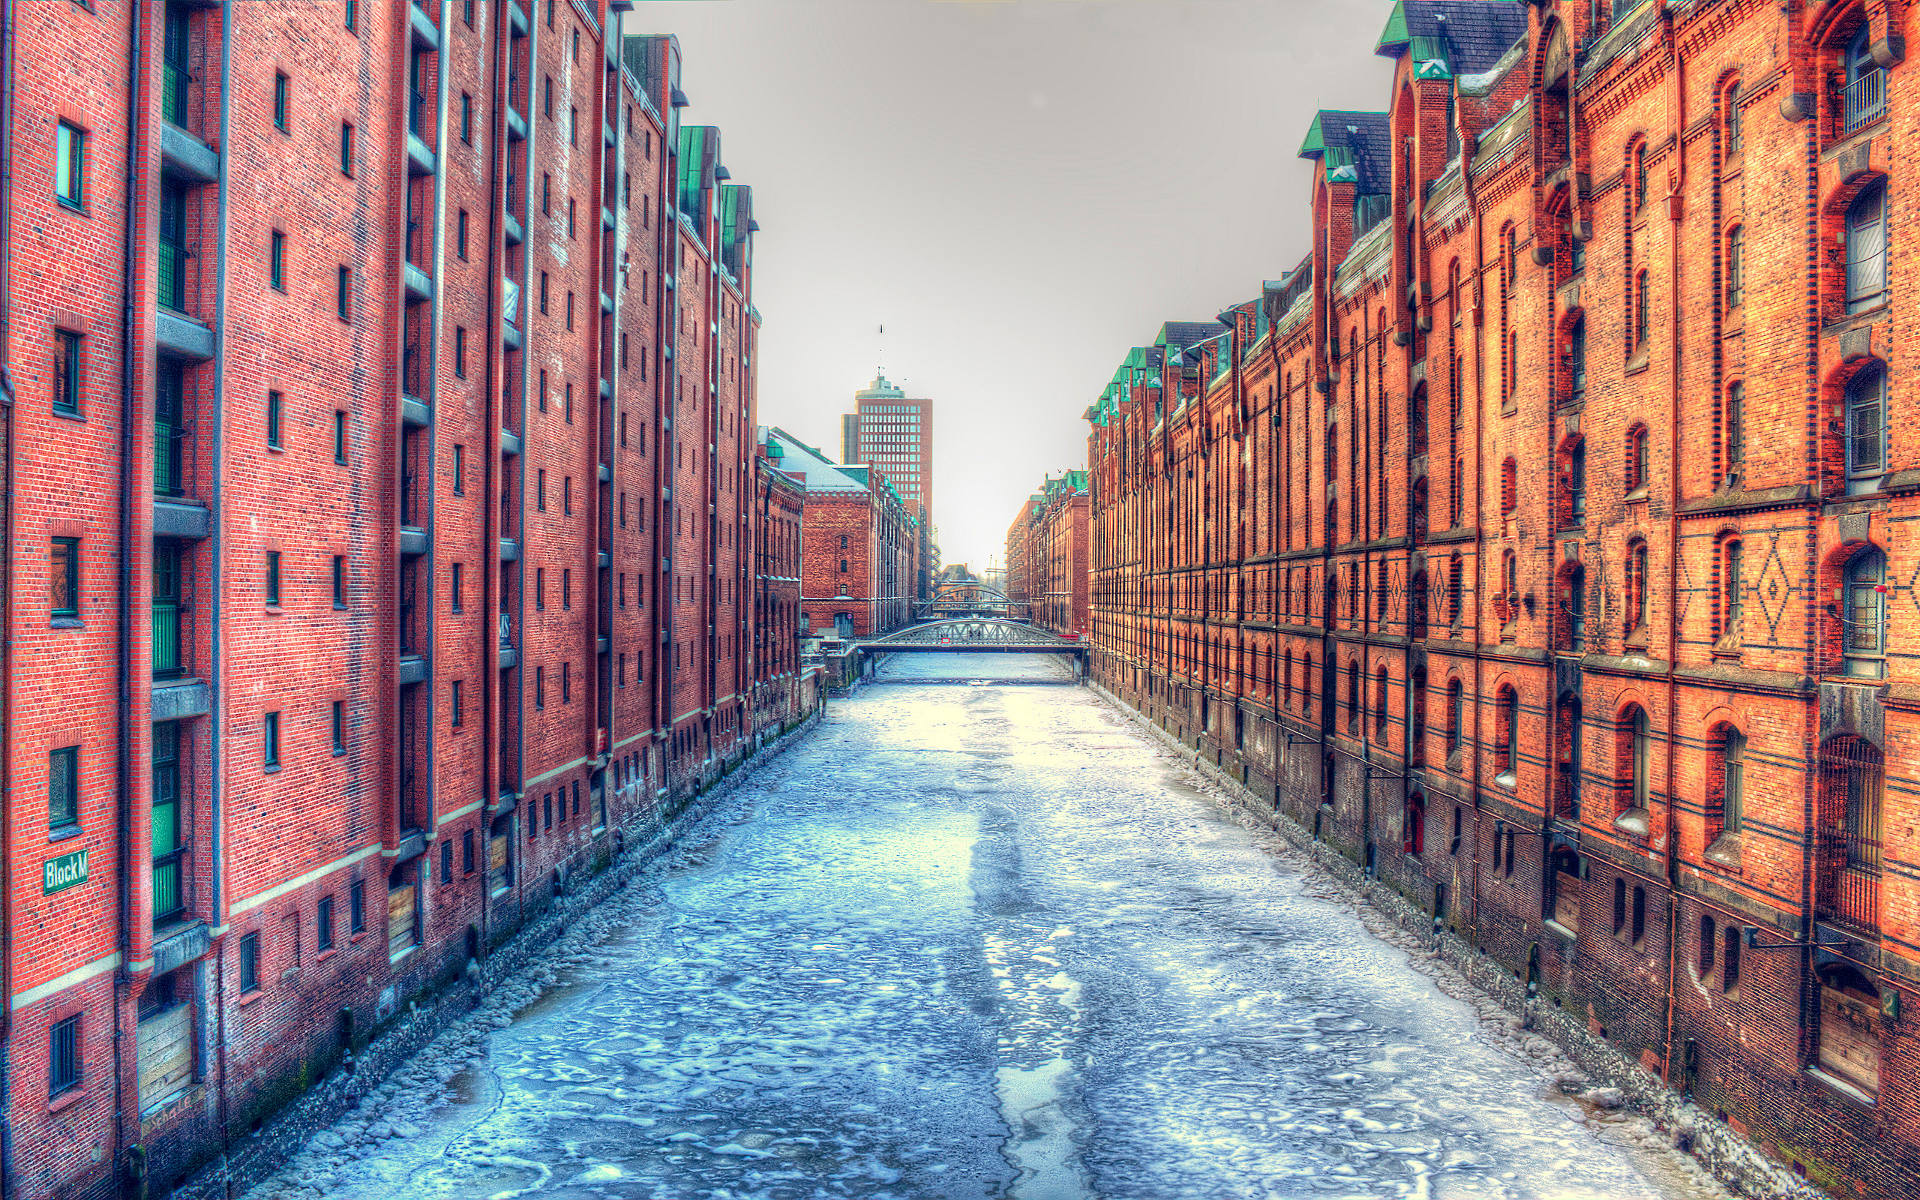 Mobile wallpaper germany, hamburg, man made, building, canal, frozen, winter, cities